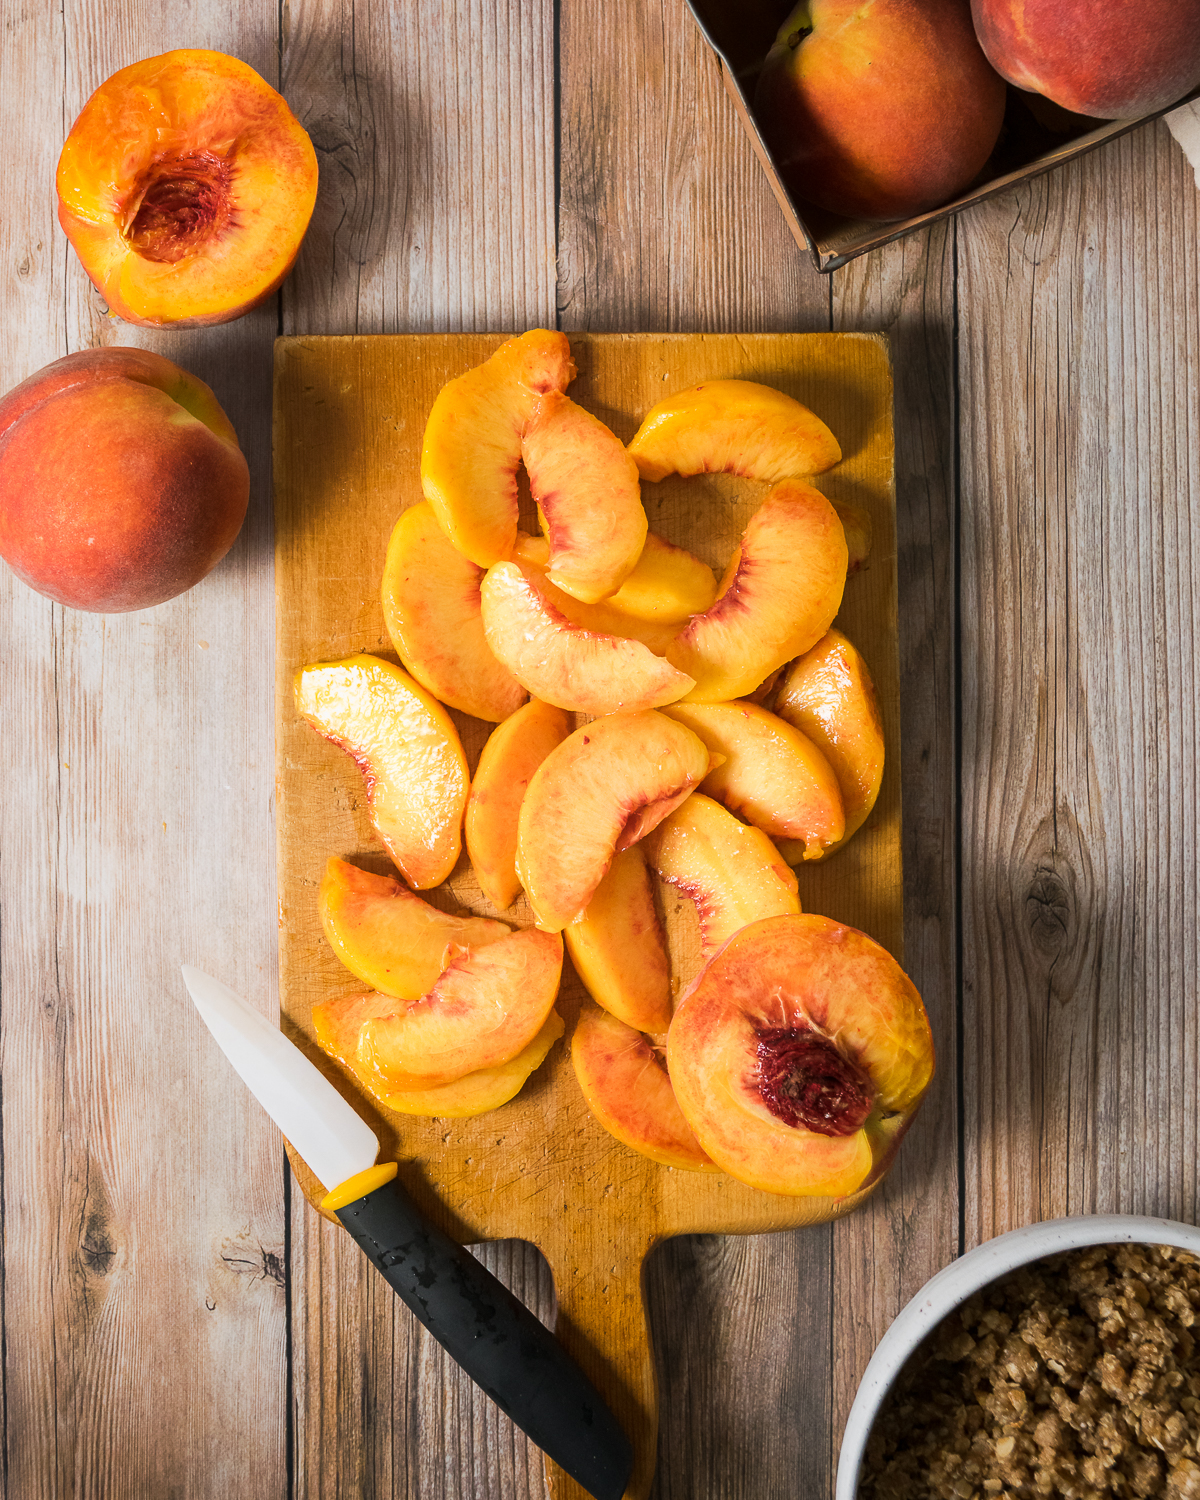 Sliced peaches on a wooden cutting board.